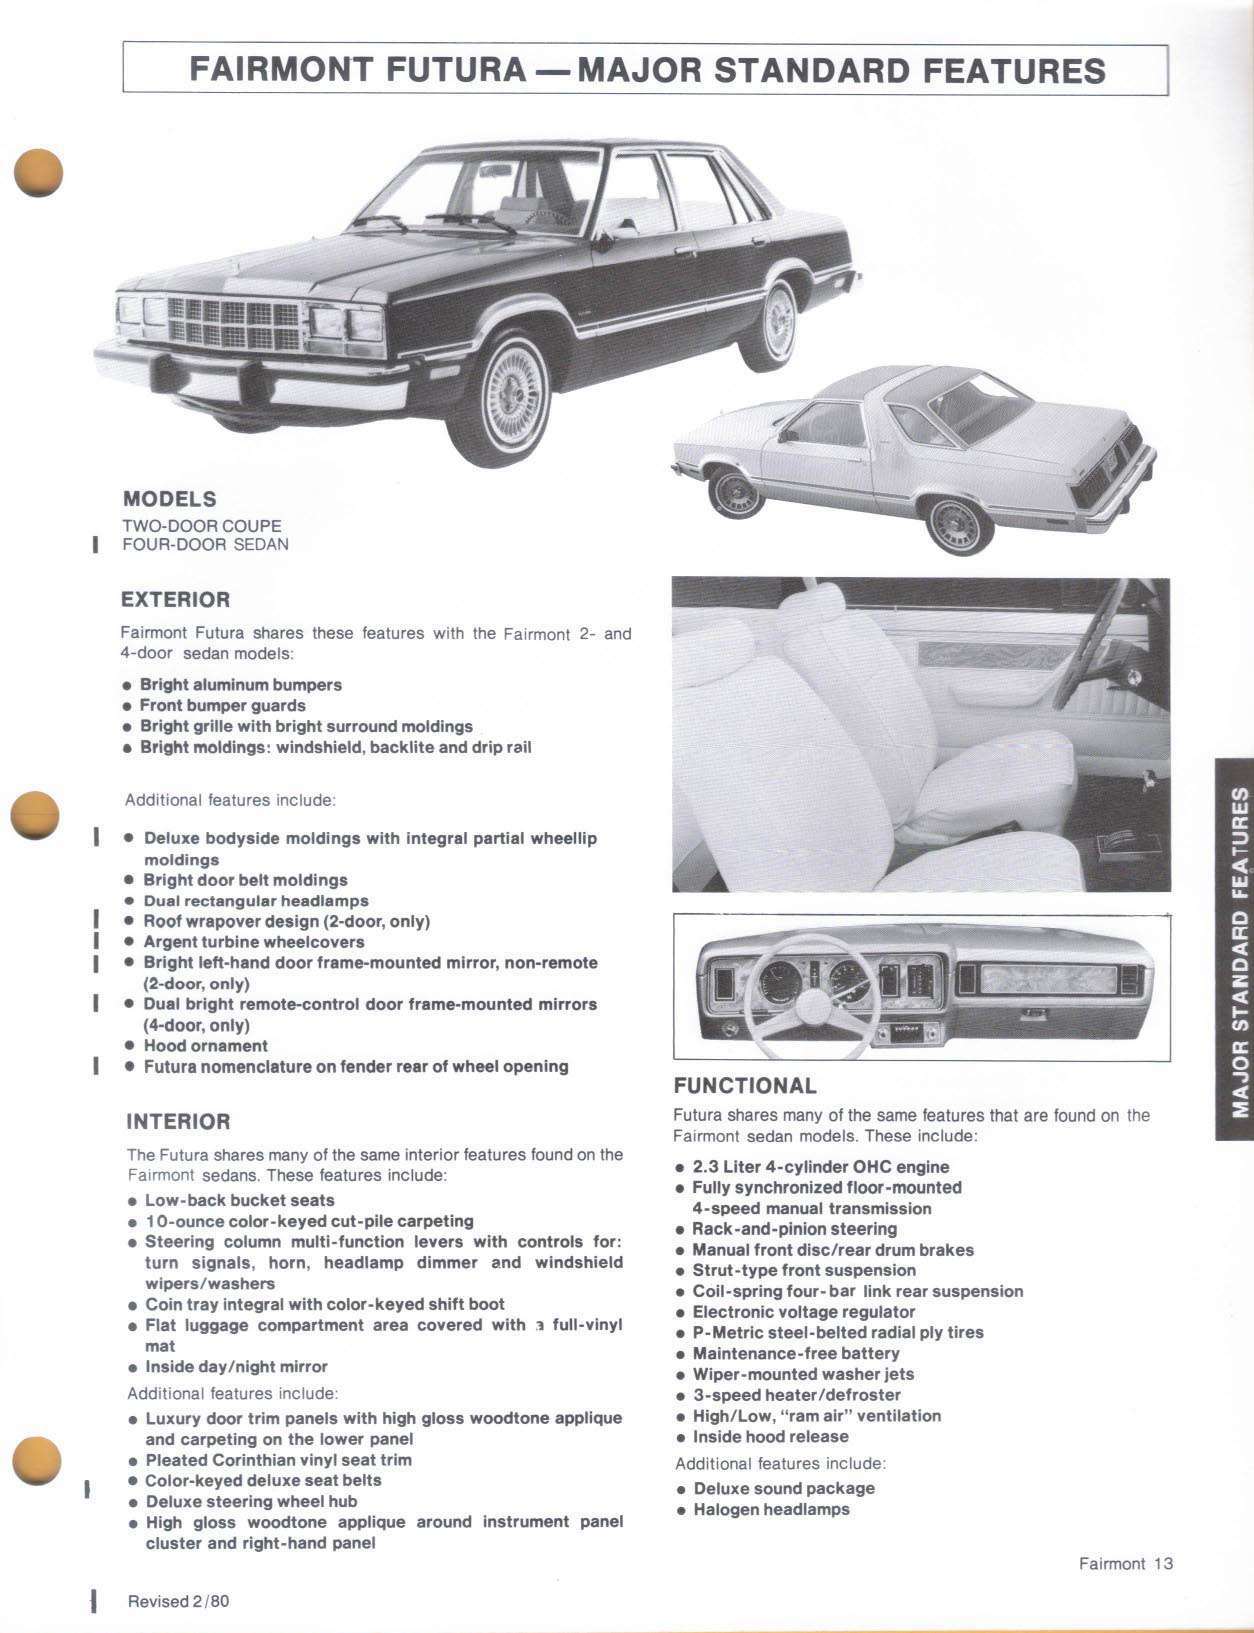 1980_Ford_Fairmont_Car_Facts-13